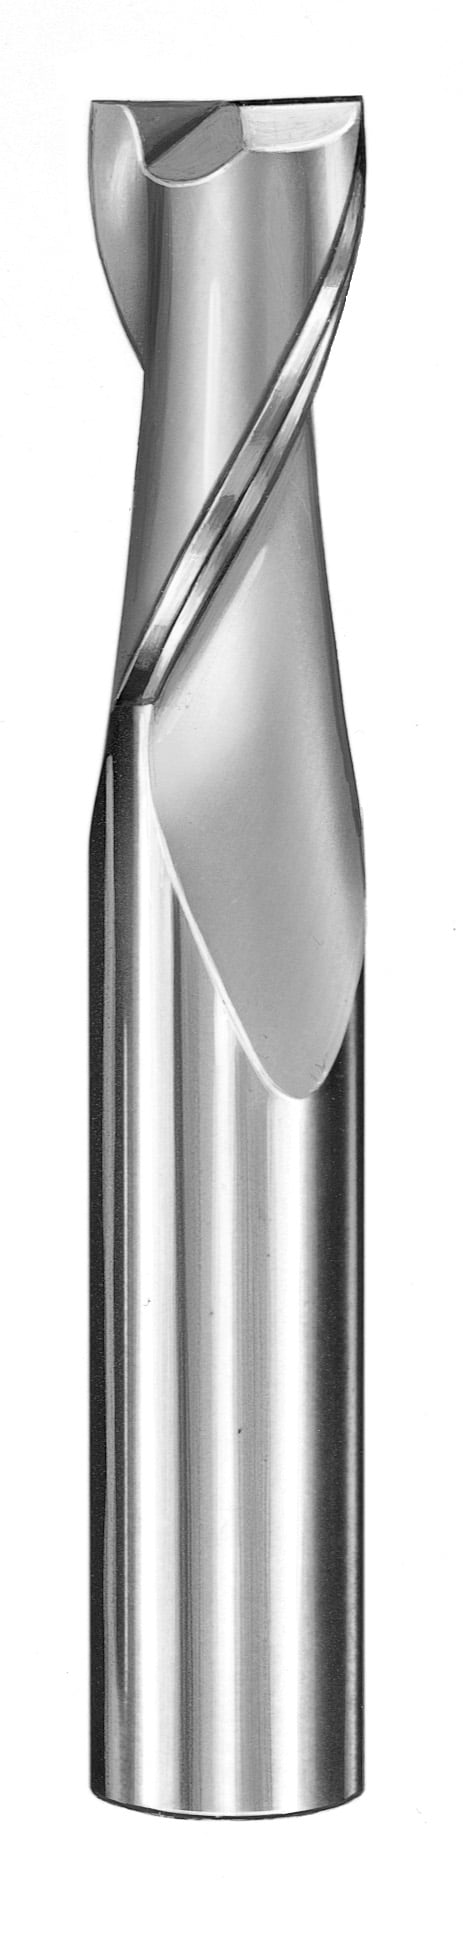 1/64" Dia, 2 Flute, Square End End Mill - 30301